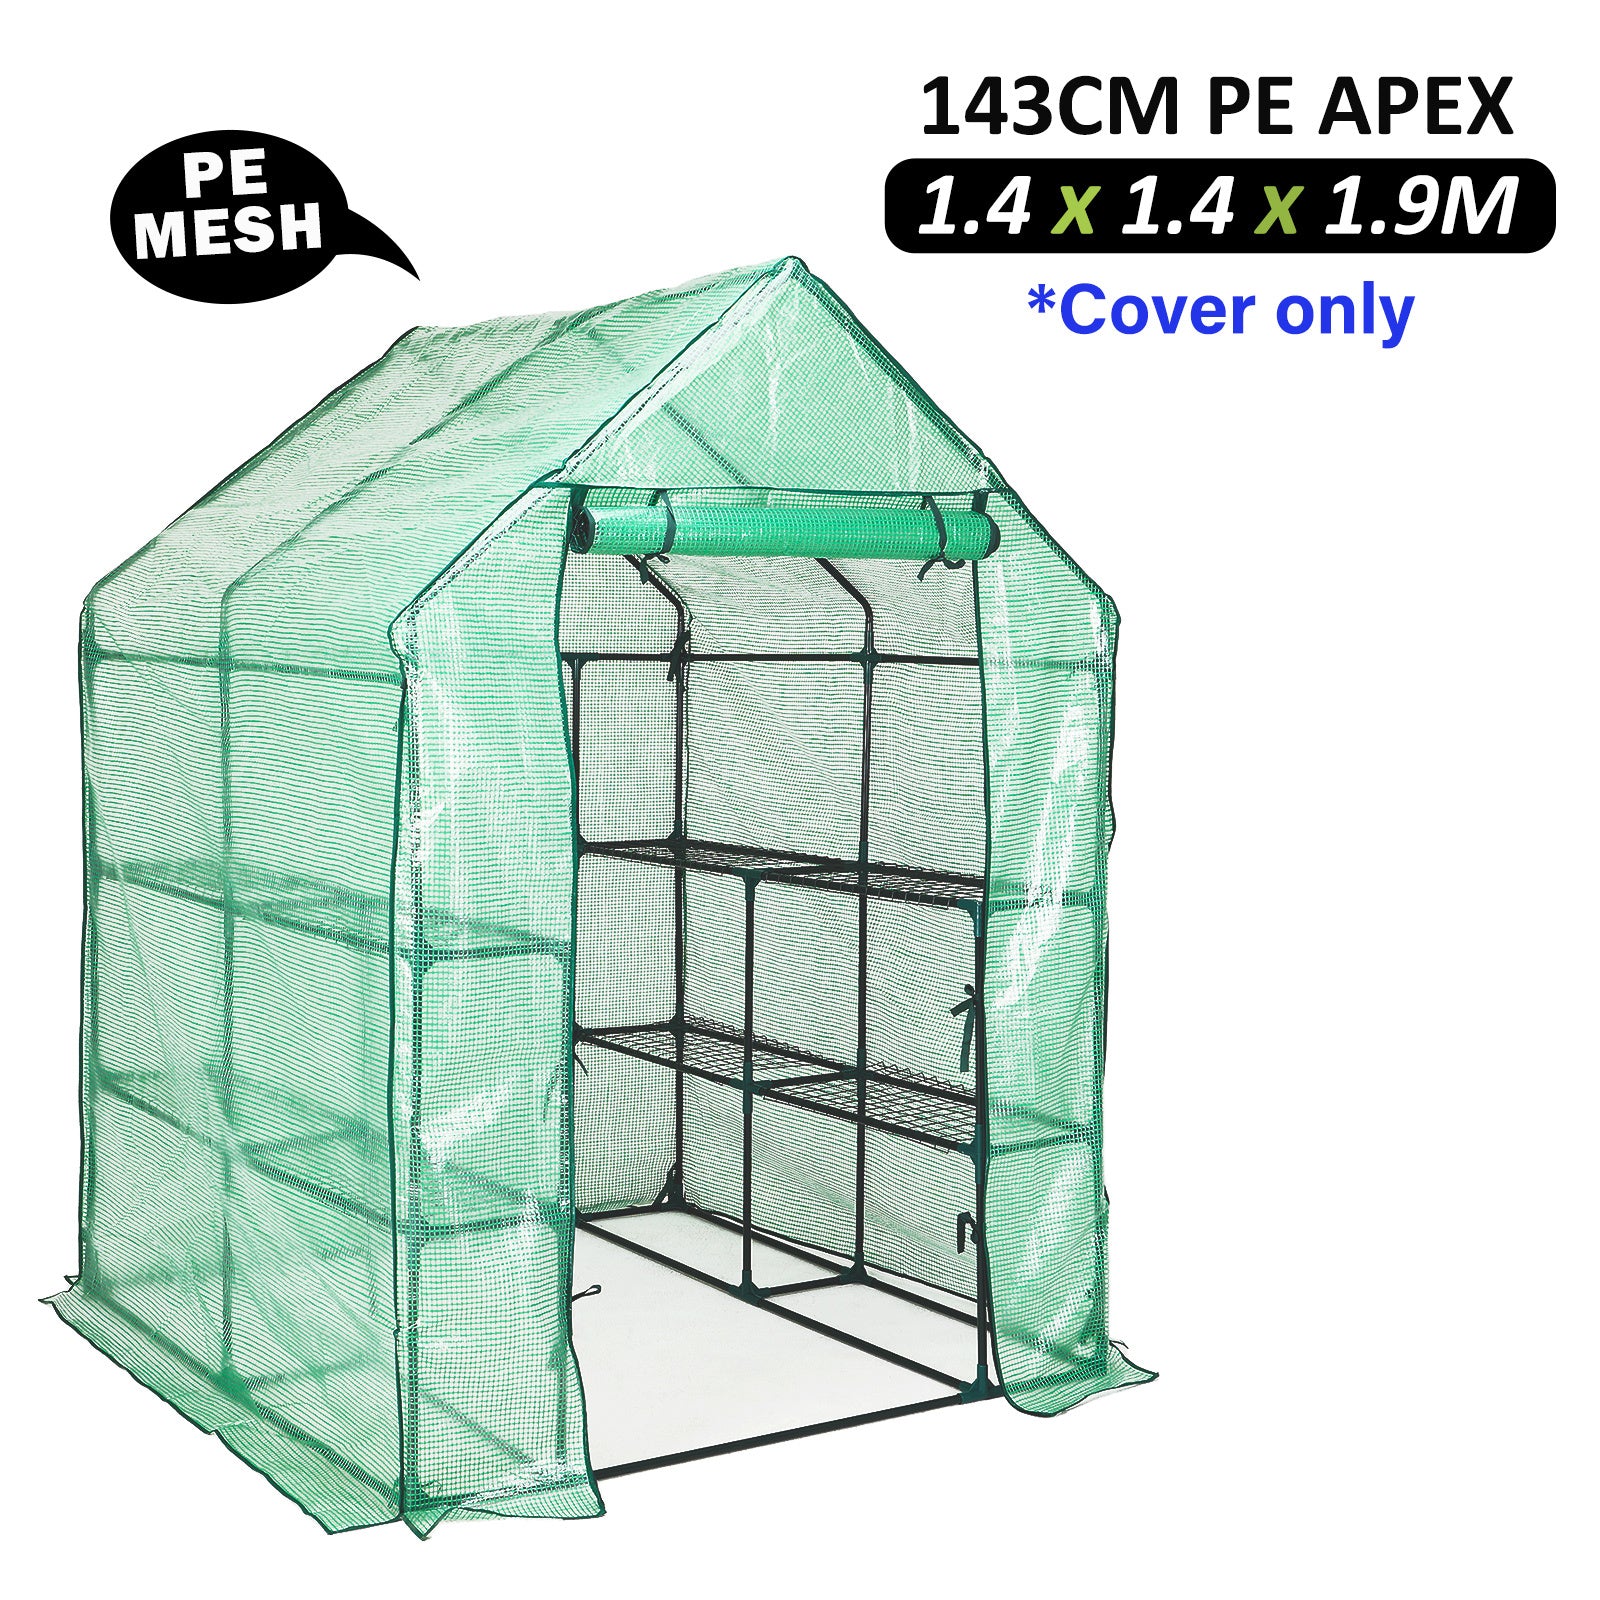 Home Ready Apex 143cm Garden Greenhouse Shed PE Cover Only - image6